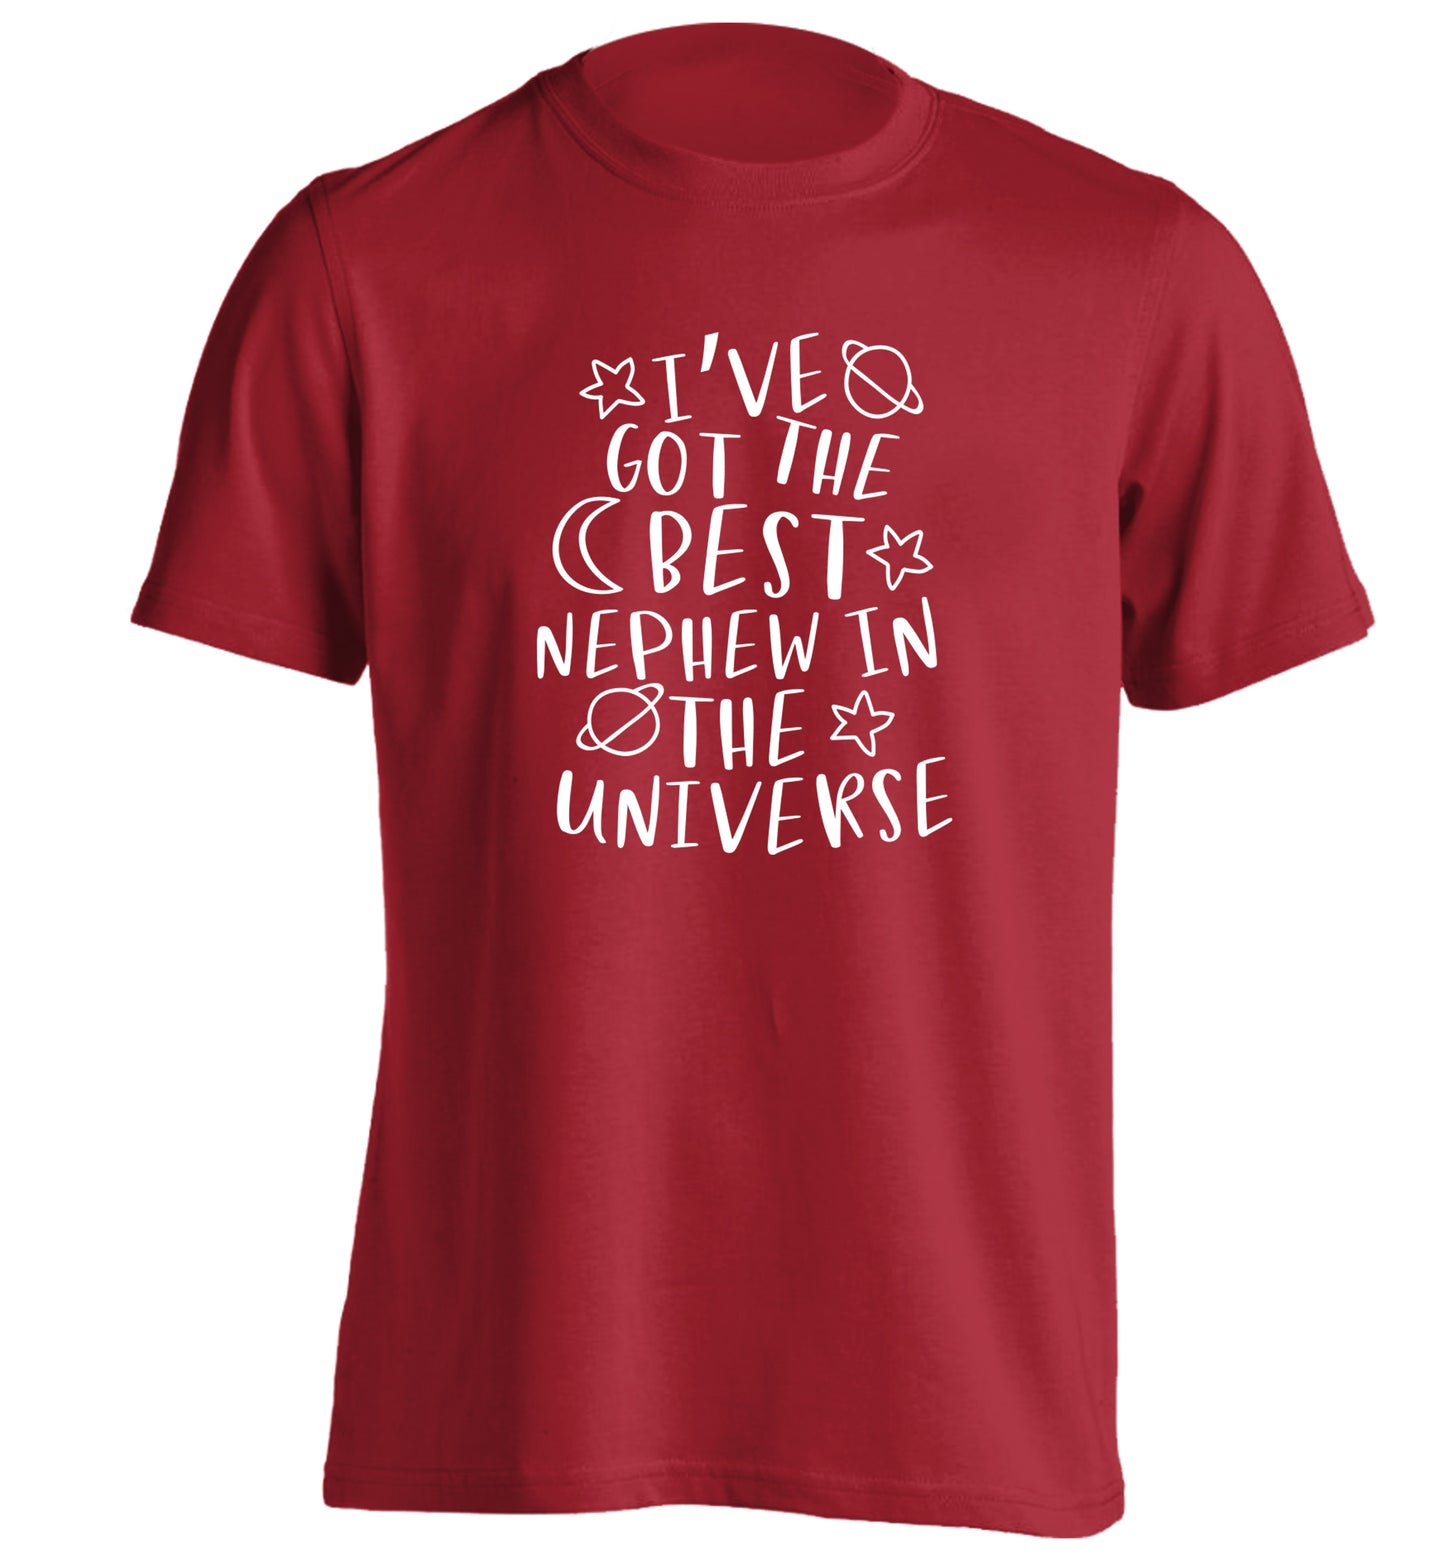 I've got the best nephew in the universe adults unisex red Tshirt 2XL